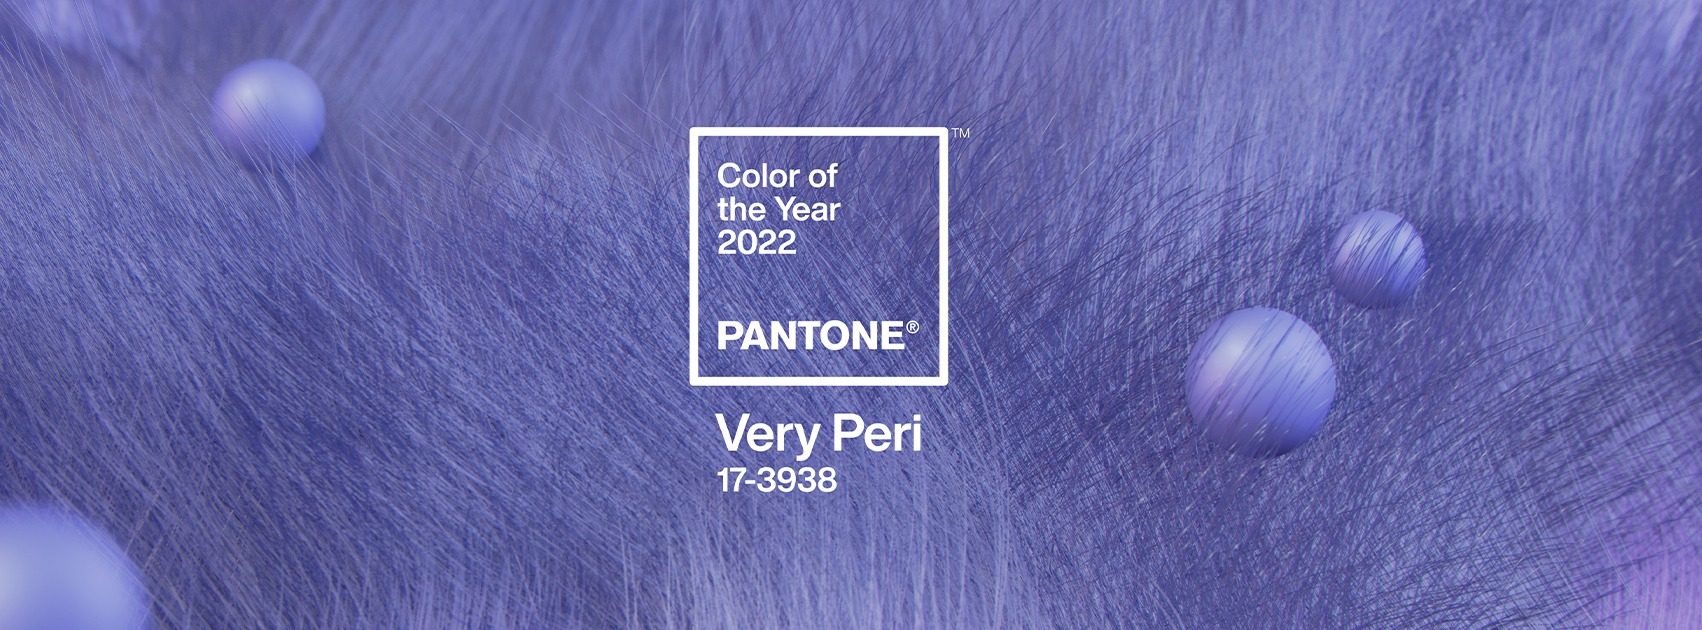 Pantone Very Peri 2022 colour of the year trends